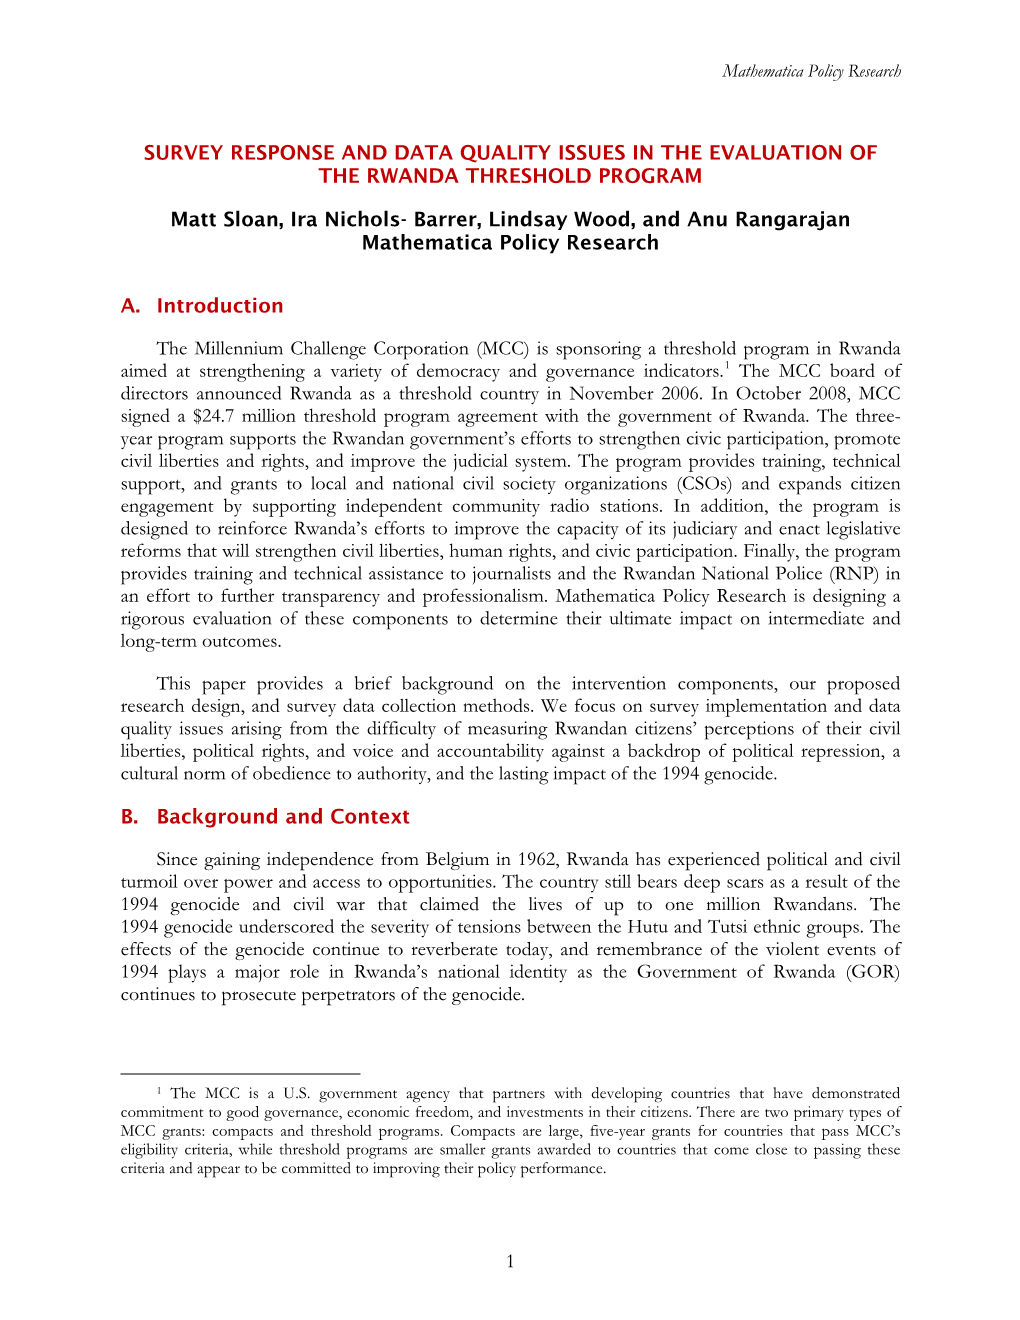 Survey Response and Data Quality Issues in the Evaluation of the Rwanda Threshold Program